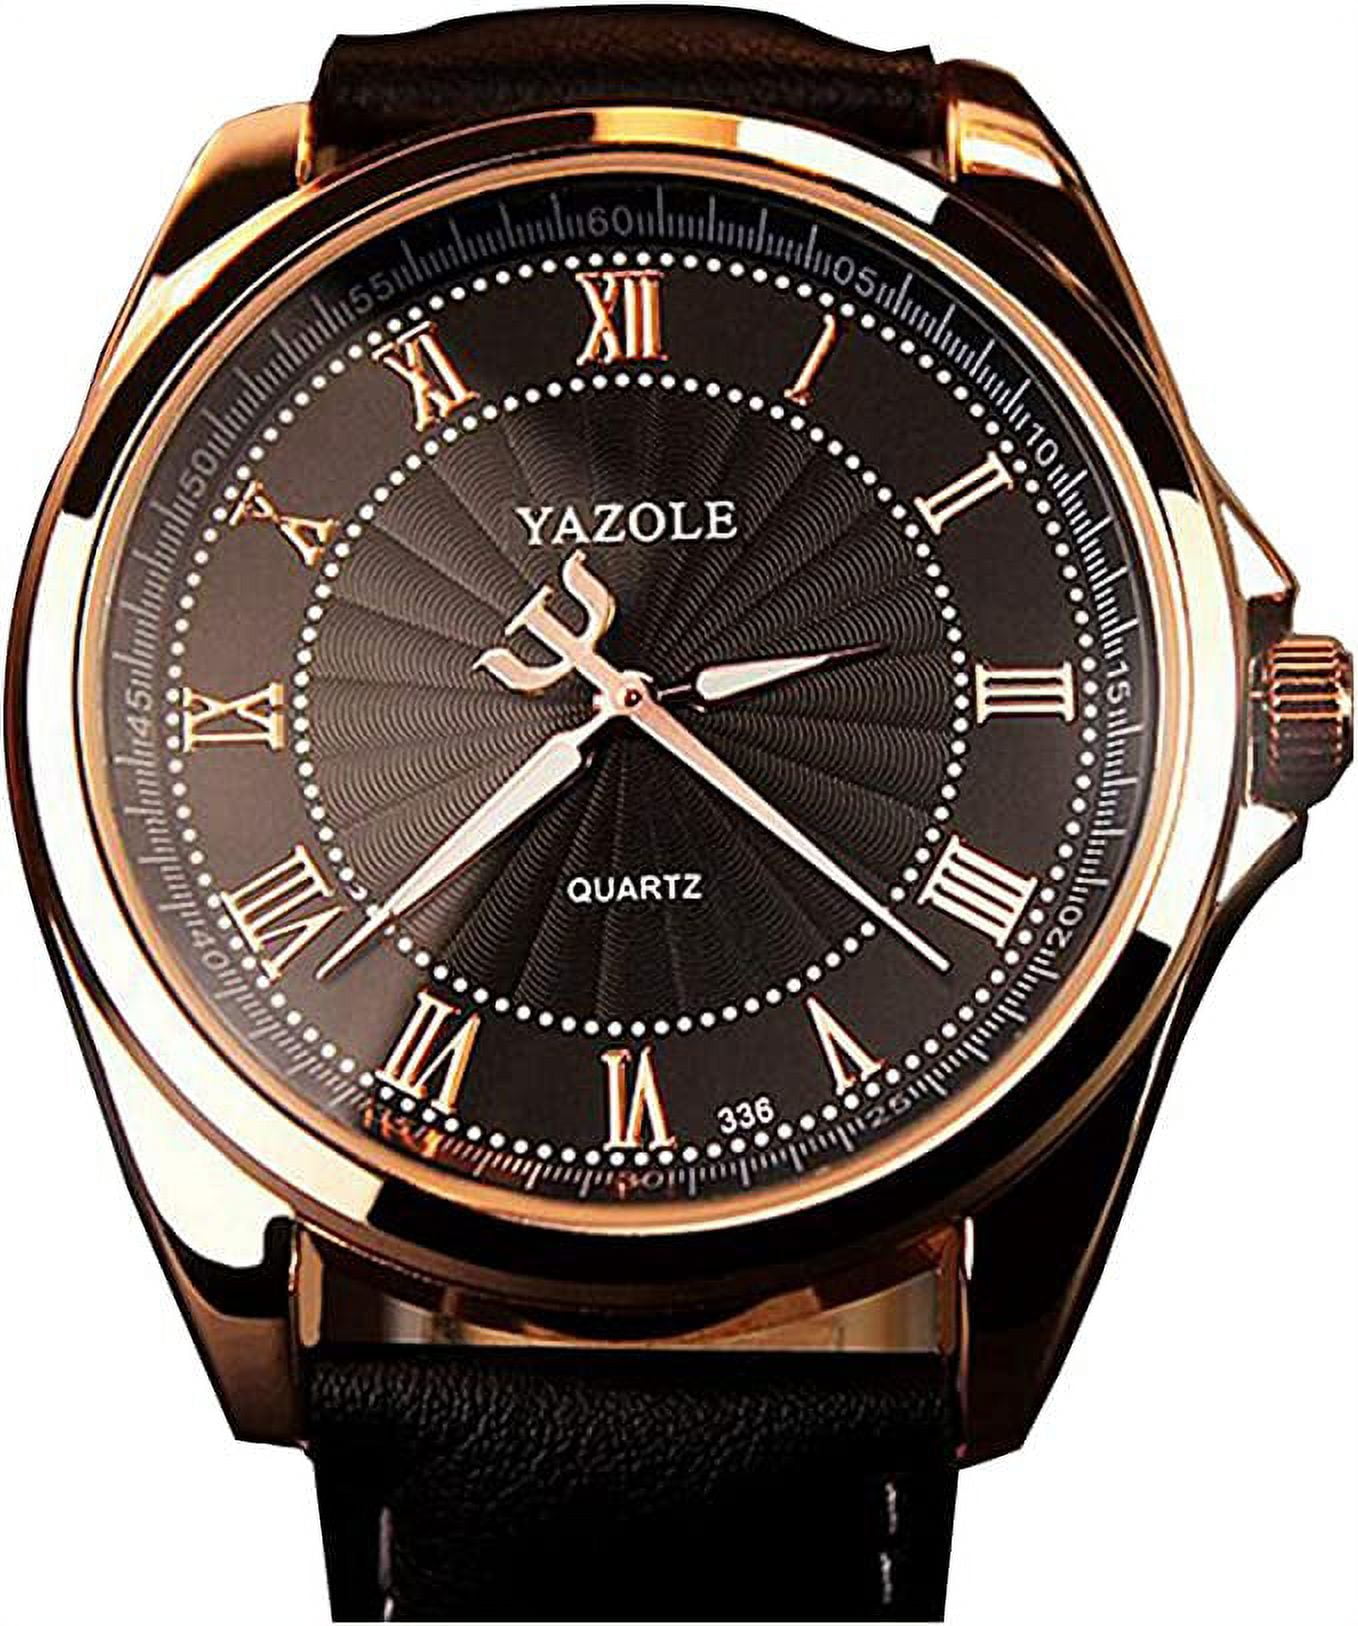  Casio Men's 'Diver Style' Quartz Resin Casual Watch,  Color:Black (Model: MRW-210H-7AVCF) : Casio: Clothing, Shoes & Jewelry